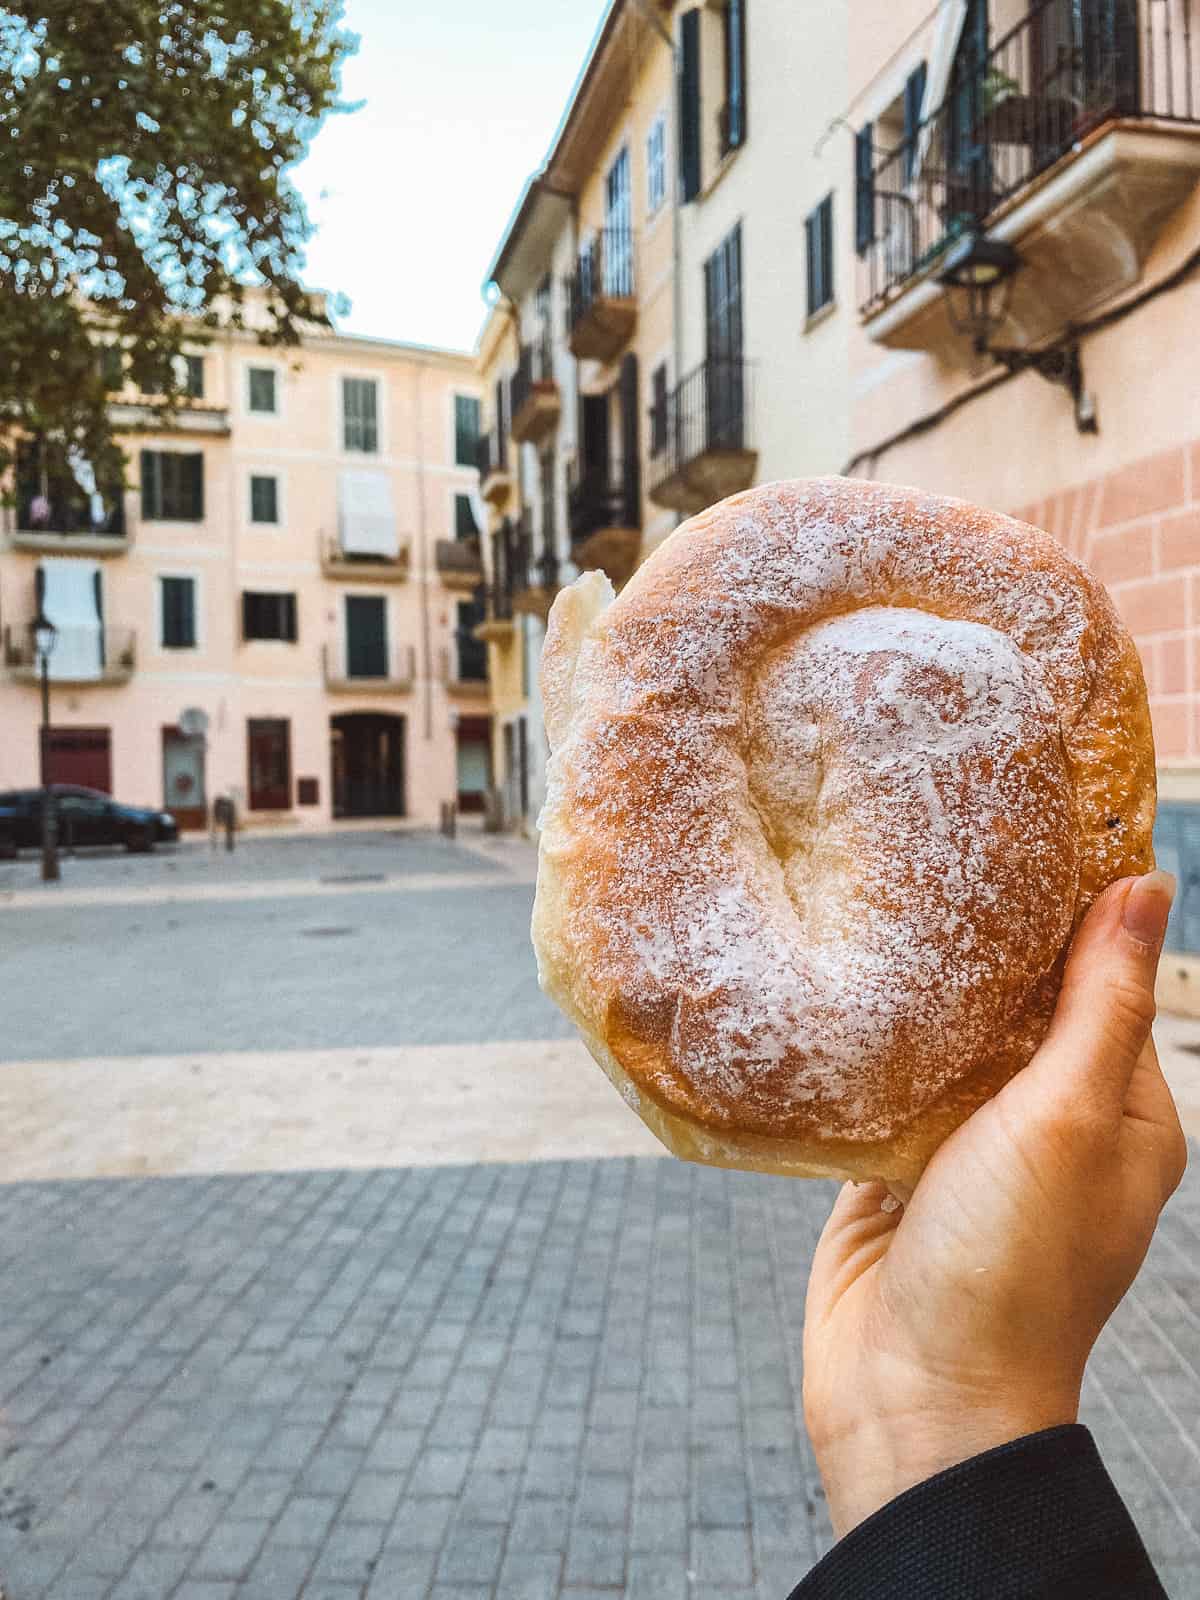 a spiral shaped ensaimada pastry in Mallorca covered with powdered sugar